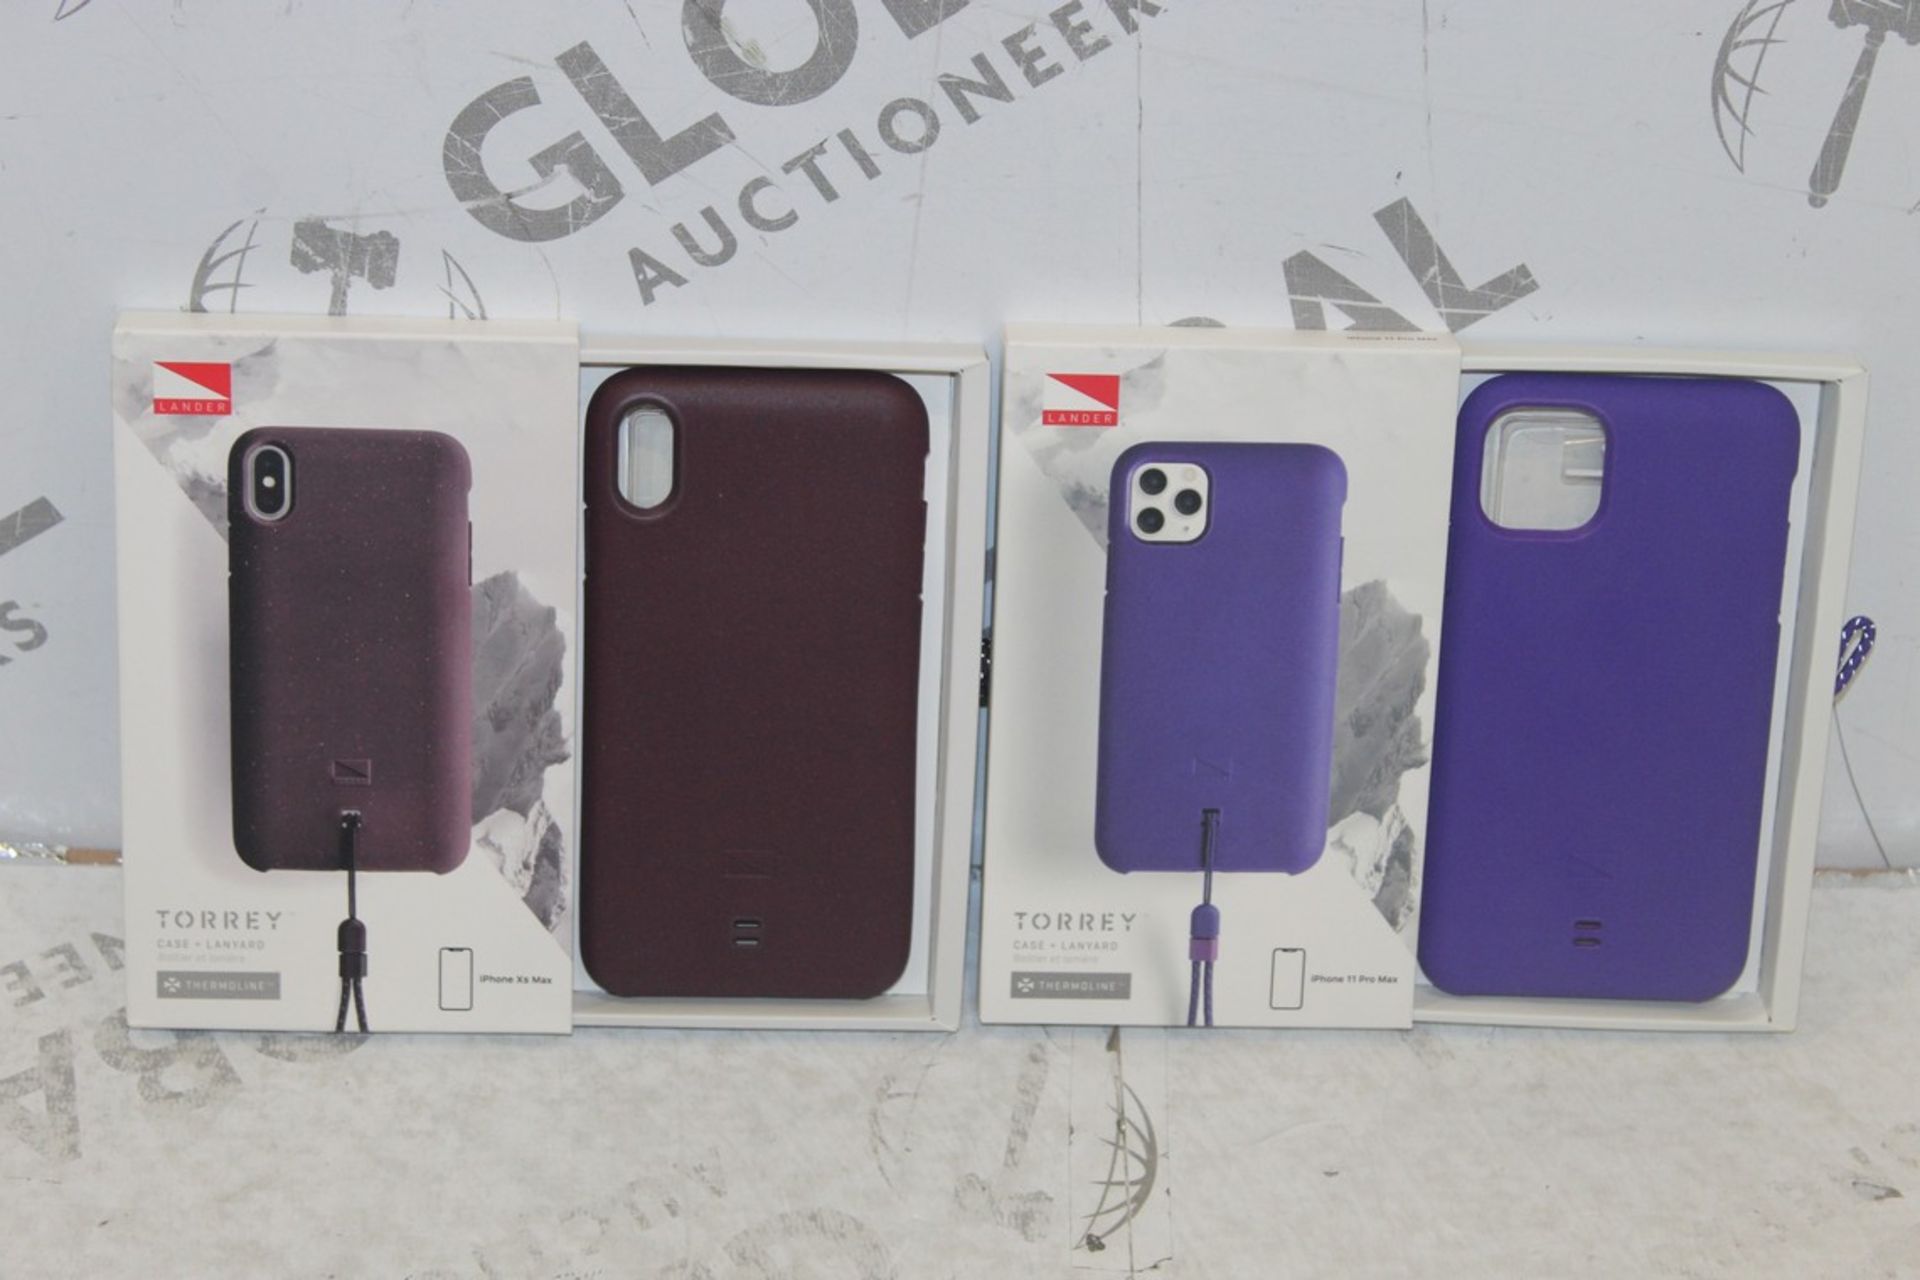 Assorted Tourrey iPhone Cases For XS Max, Iphone 1